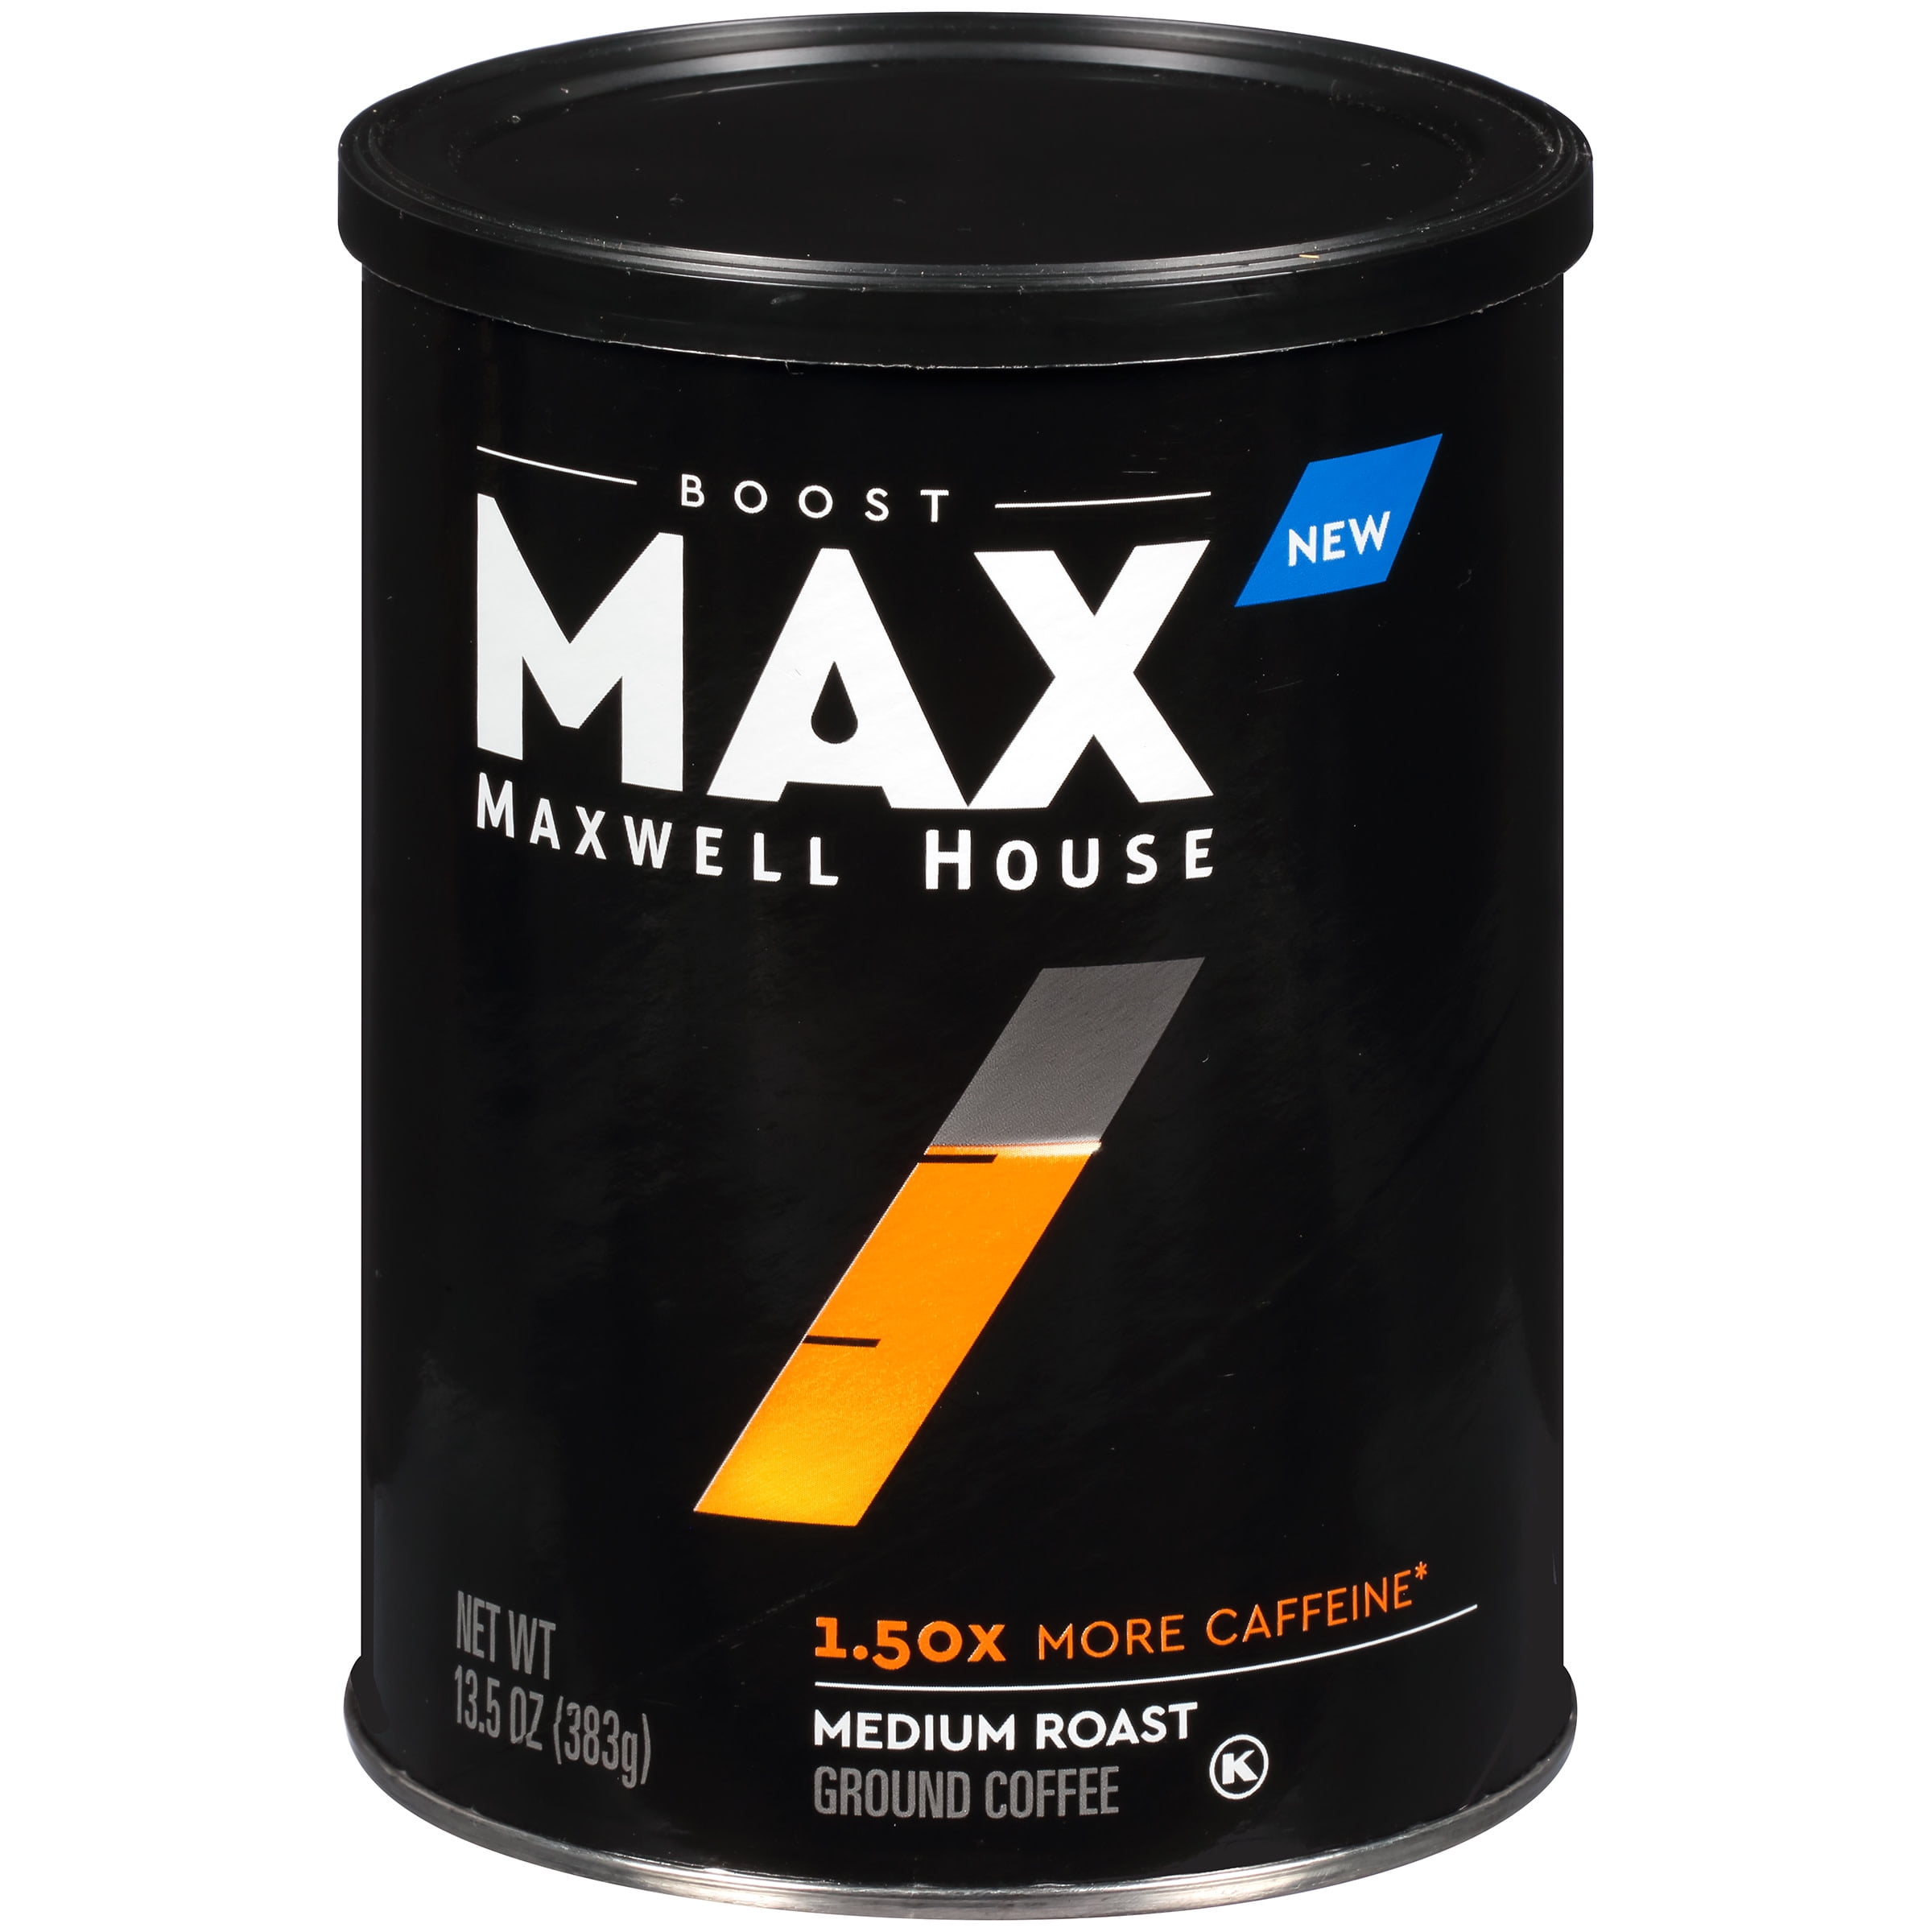 Maxwell House Max Boost Medium Roast Ground Coffee with 1.50X More